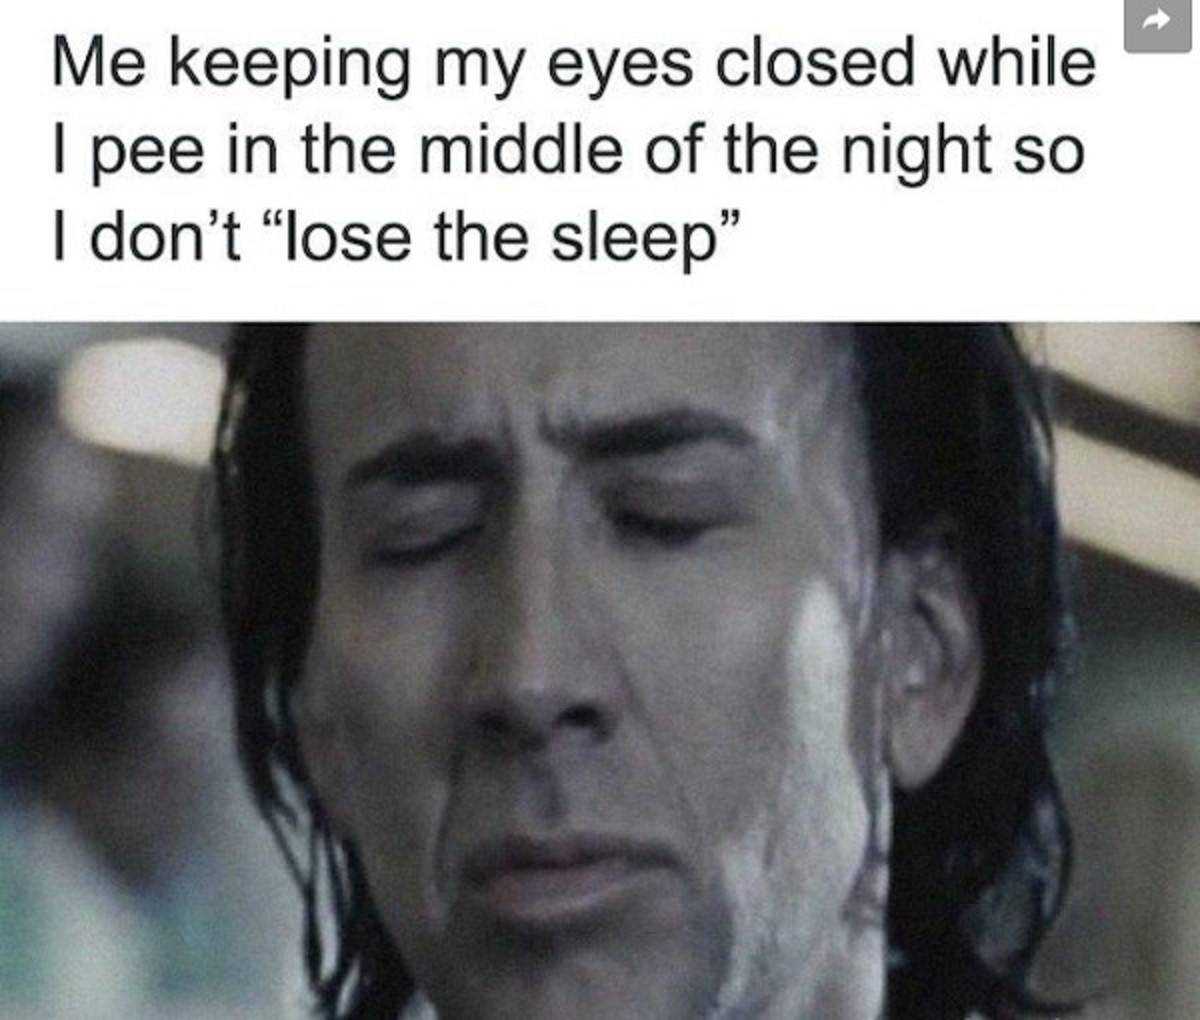 photo caption - Me keeping my eyes closed while. I pee in the middle of the night so I don't "lose the sleep"